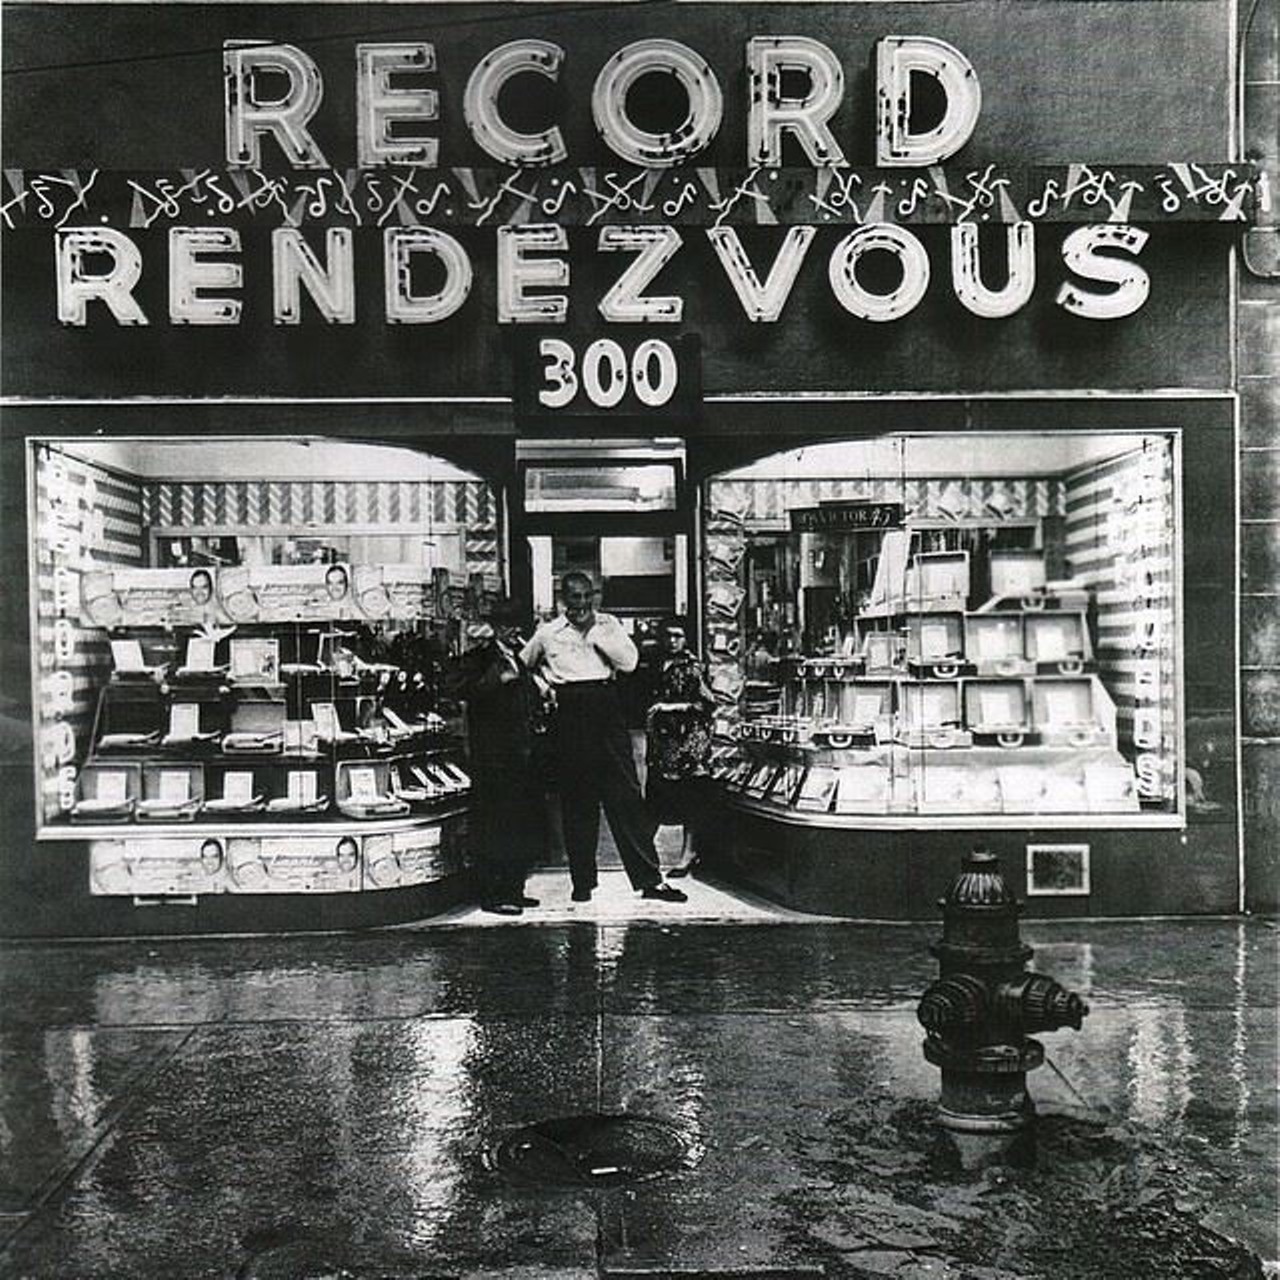  Record Rendezvous
300 Prospect Ave., Cleveland
Along with Alan Freed, Leo Mintz was instrumental in making Cleveland the Rock N’ Roll capital. He opened Record Rendezvous in 1938 and the shop was one of the first record stores to put them into bins for customers to browse. He was a big supporter of Freed, which led to the infamous Moondog Coronation Ball, otherwise known as the first rock concert. He ran Record Rendezvous all the way until he died in 1976. There were five locations of the store at one point. Mintz, not Freed, is actually believed to be the one to coin the term ‘Rock n’ Roll’ in order to sell records.